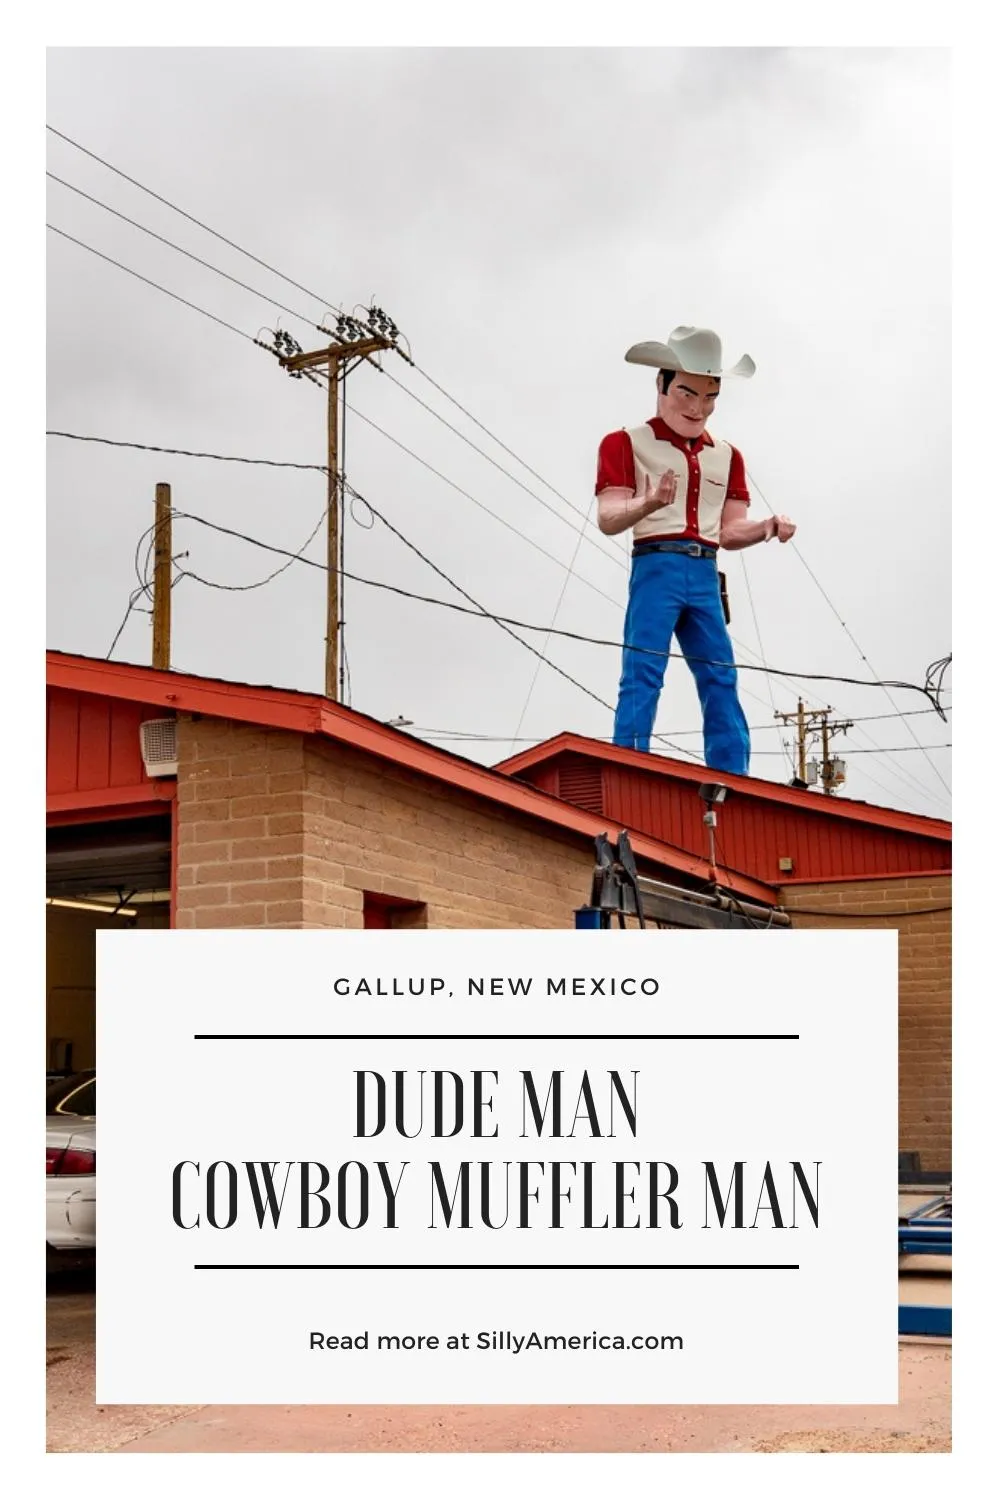 Howdy from Route 66! If you're looking for a fun Route 66 roadside attraction with a western twist, this one is for you! Meet "Dude Man" the cowboy muffler man in Gallup, New Mexico. Visit this fun New Mexico roadside attraction on a Route 66 road trip of family vacation in New Mexico. Add it to your travel itinerary! #Route66 #Route66NewMexico #Route66RoadTrip #RoadsideAttraction #NewMexicoRoadsideAttraction #Route66RoadsideAttraction #NewMexicoRoadTrip #RoadTripHowdy from Route 66! If you're looking for a fun Route 66 roadside attraction with a western twist, this one is for you! Meet "Dude Man" the cowboy muffler man in Gallup, New Mexico. Visit this fun New Mexico roadside attraction on a Route 66 road trip of family vacation in New Mexico. Add it to your travel itinerary! #Route66 #Route66NewMexico #Route66RoadTrip #RoadsideAttraction #NewMexicoRoadsideAttraction #Route66RoadsideAttraction #NewMexicoRoadTrip #RoadTrip